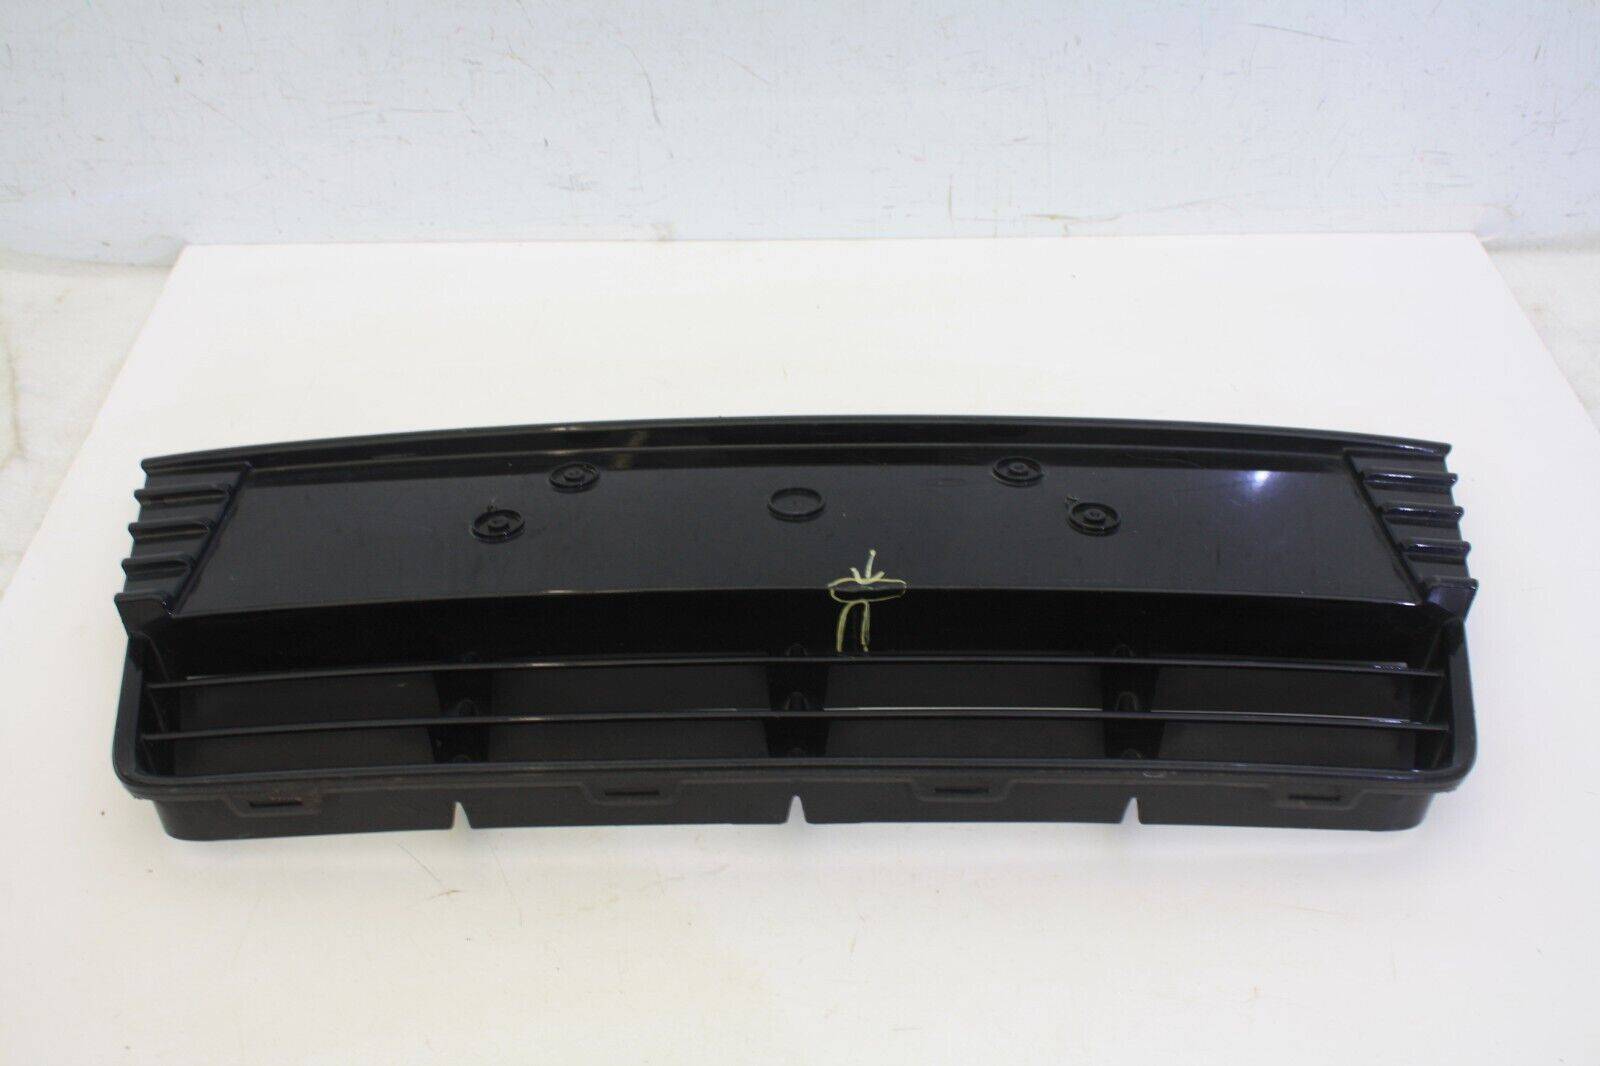 Ford-Focus-Front-Bumper-Grill-2011-TO-2014-BM51-17K945-E-Genuine-SEE-PICS-176238481574-5